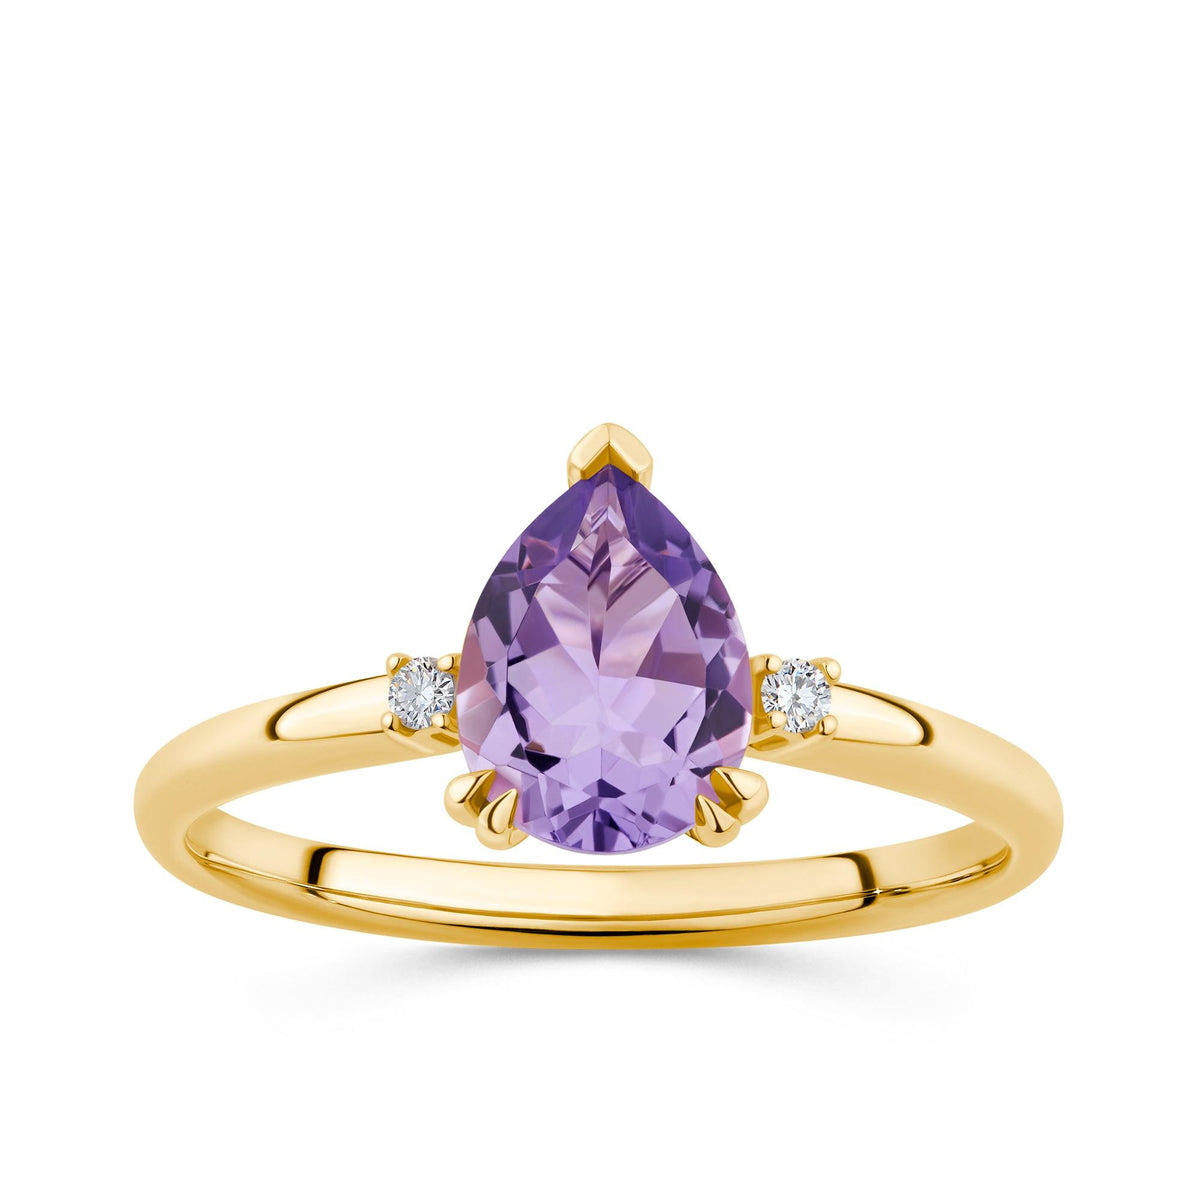 Pear Cut Amethyst & Diamond Ring in 9ct Yellow Gold - Wallace Bishop